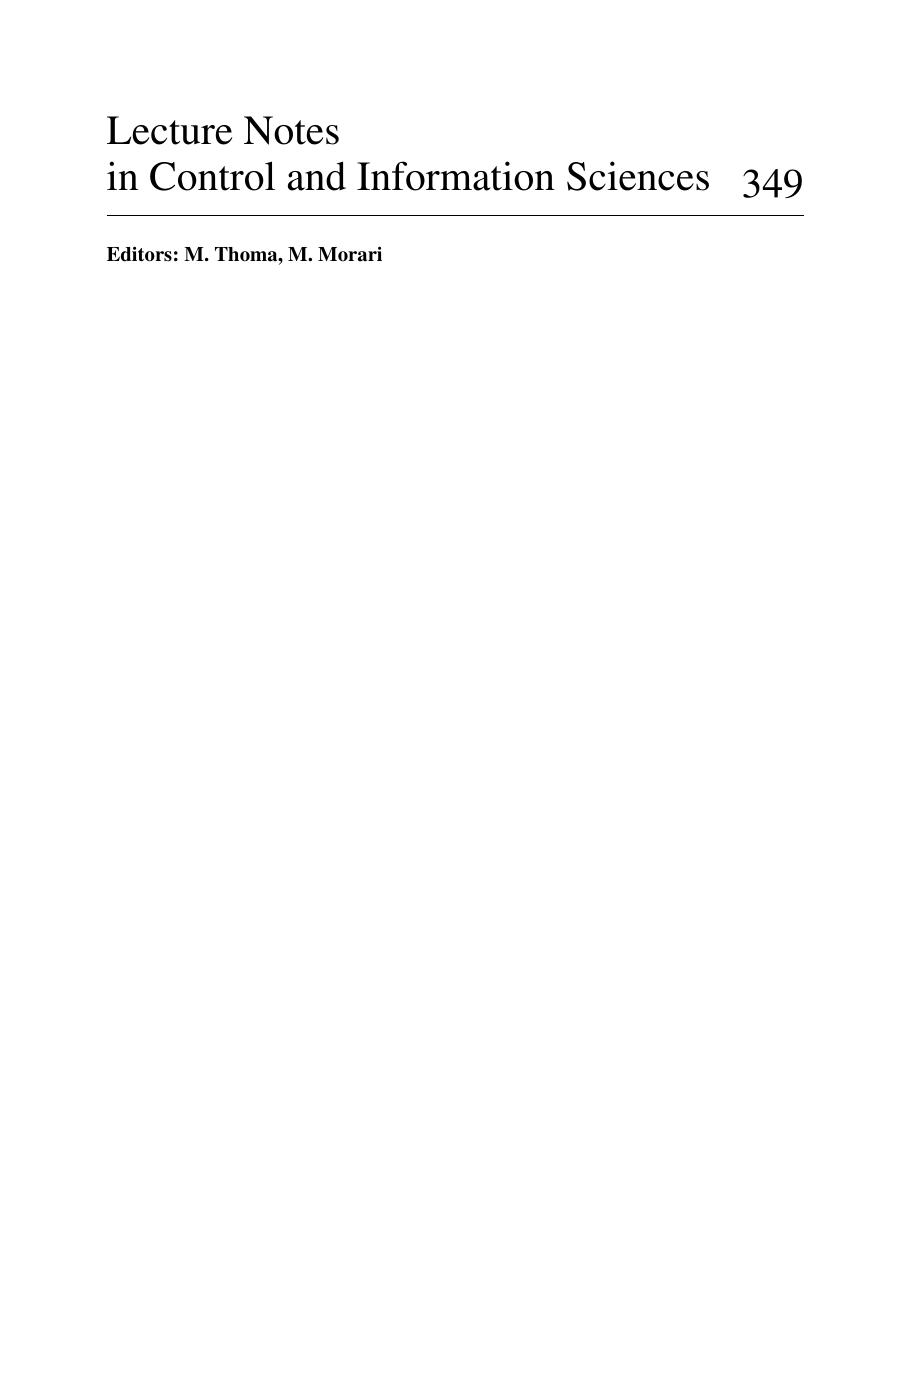 Control Systems Theory 2007.pdf